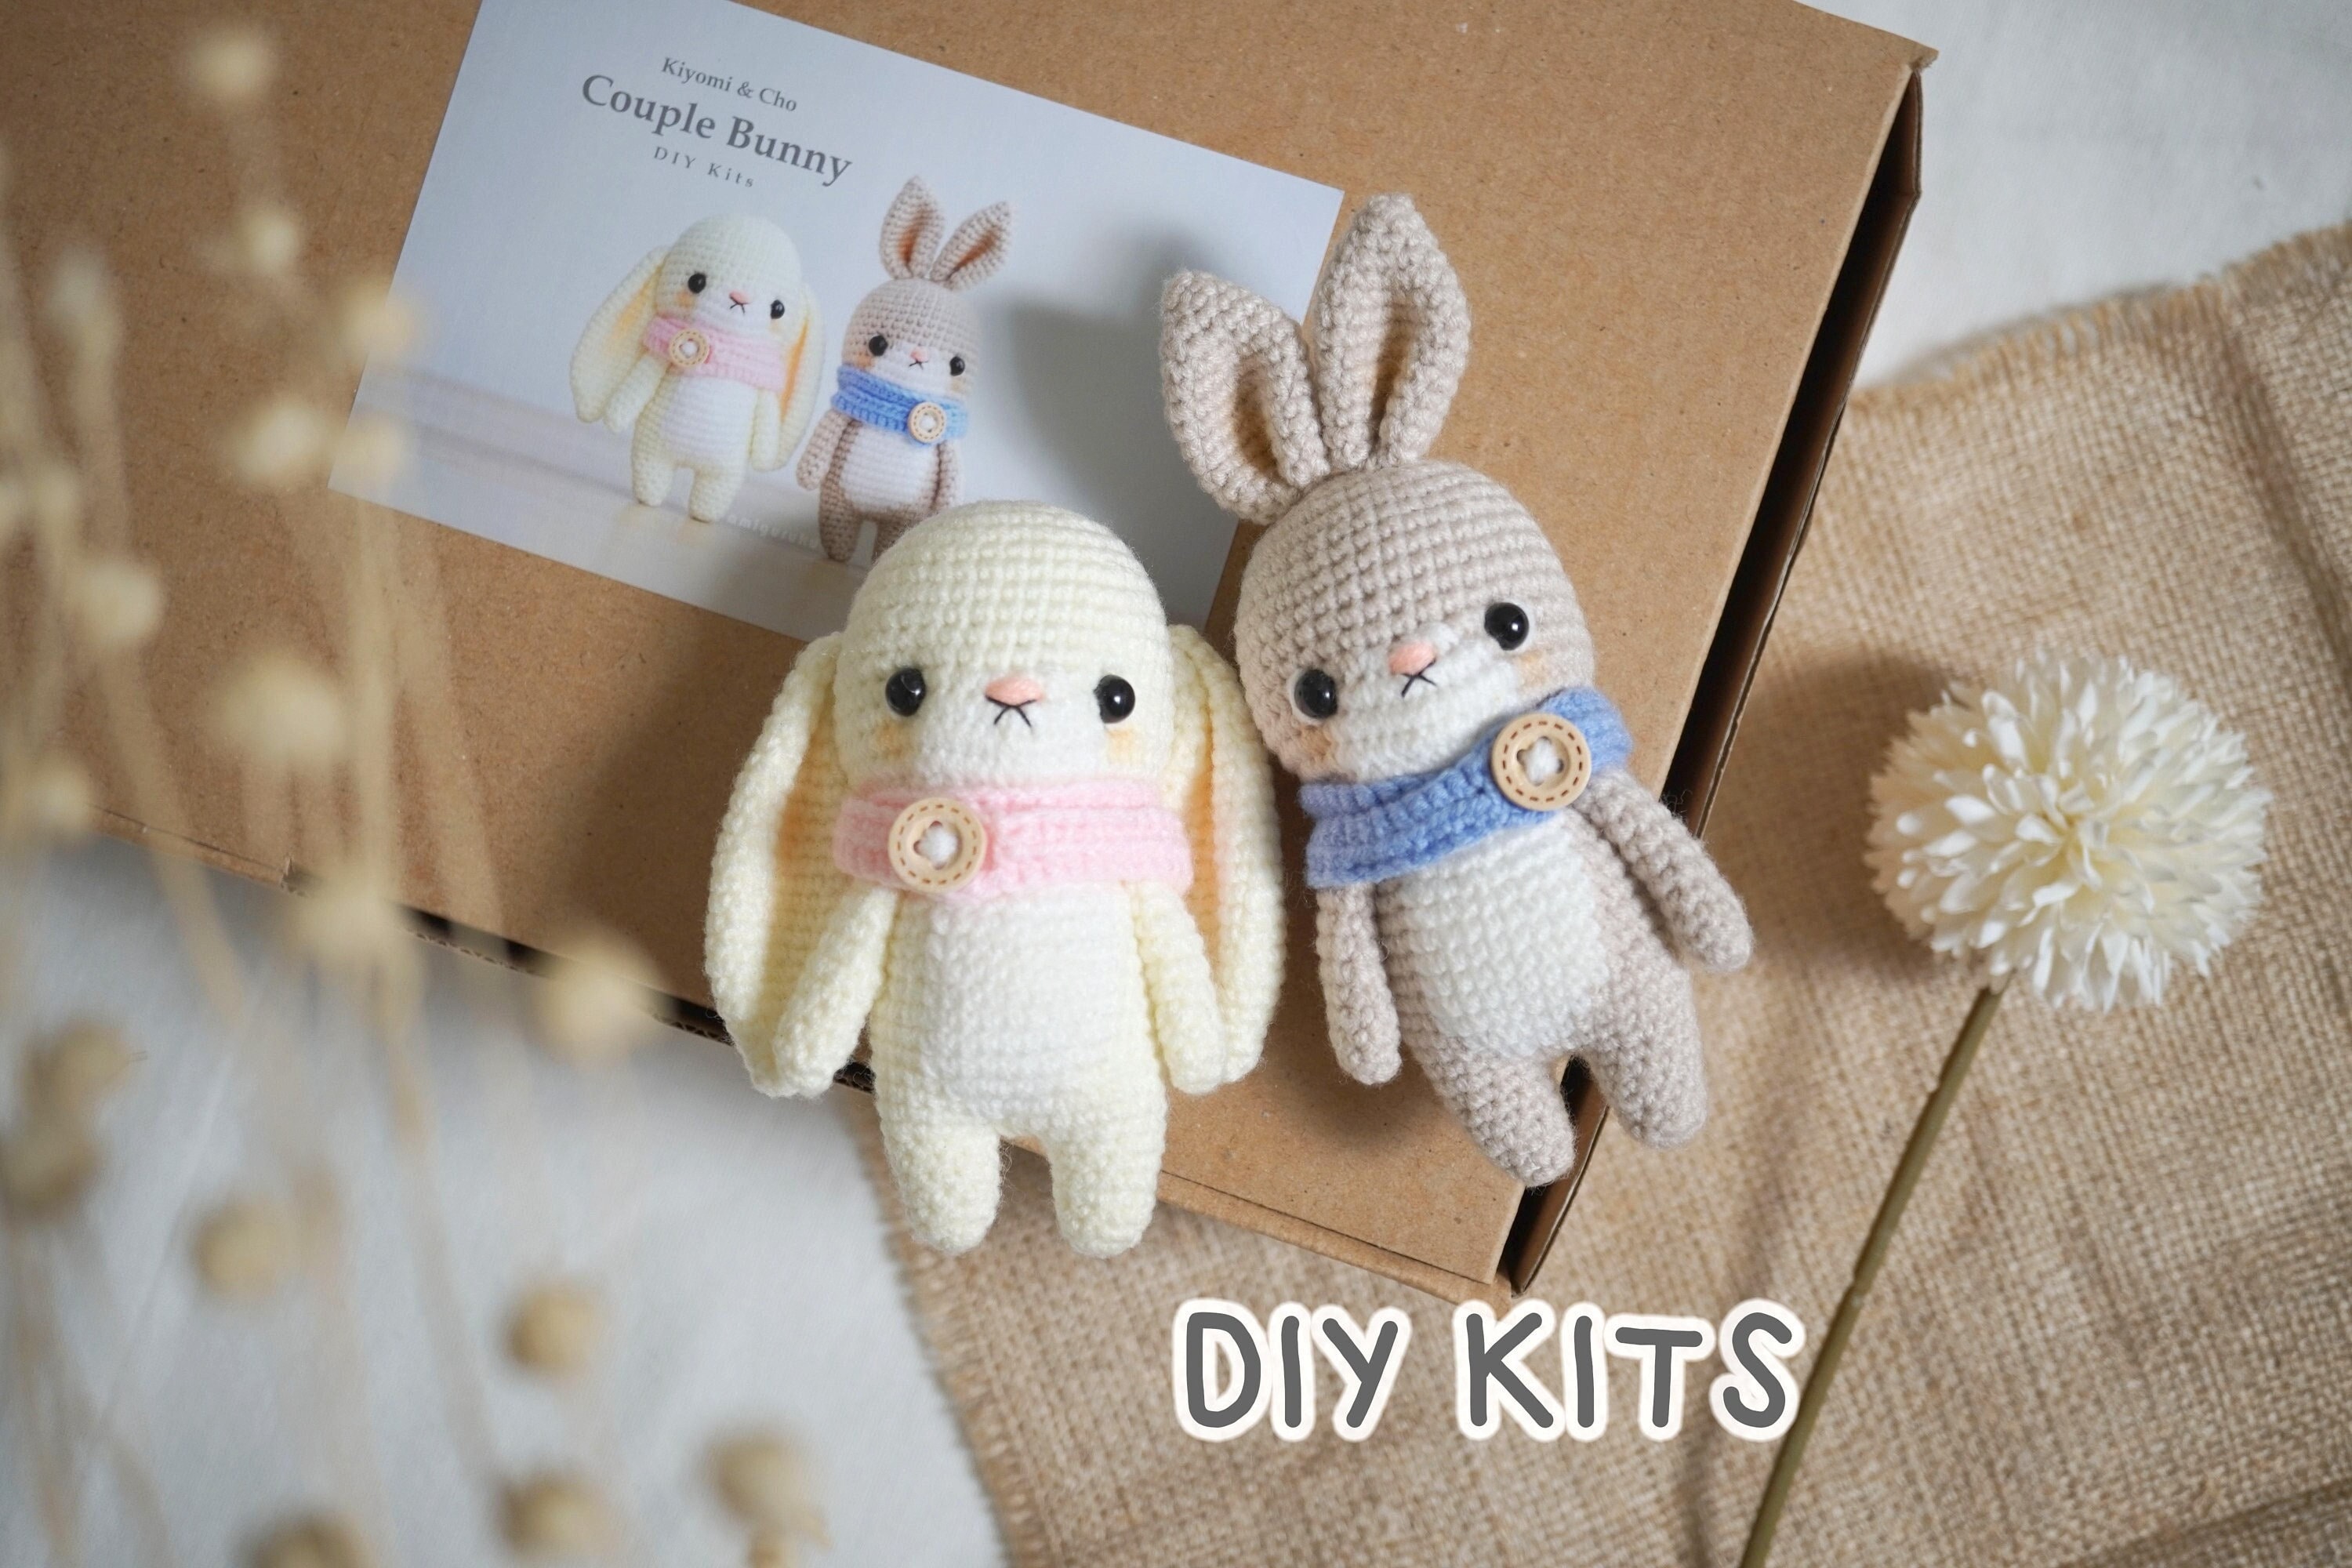 Rabbit And Tulip Crochet Kit For Beginners, Amigurumi Stuffed Animals -  Gift Animal Crochet Starter Kit All-In-One Complete Crochet Kit Learn To Crochet  Sets With Instructions And Step By Step Video Tutorials